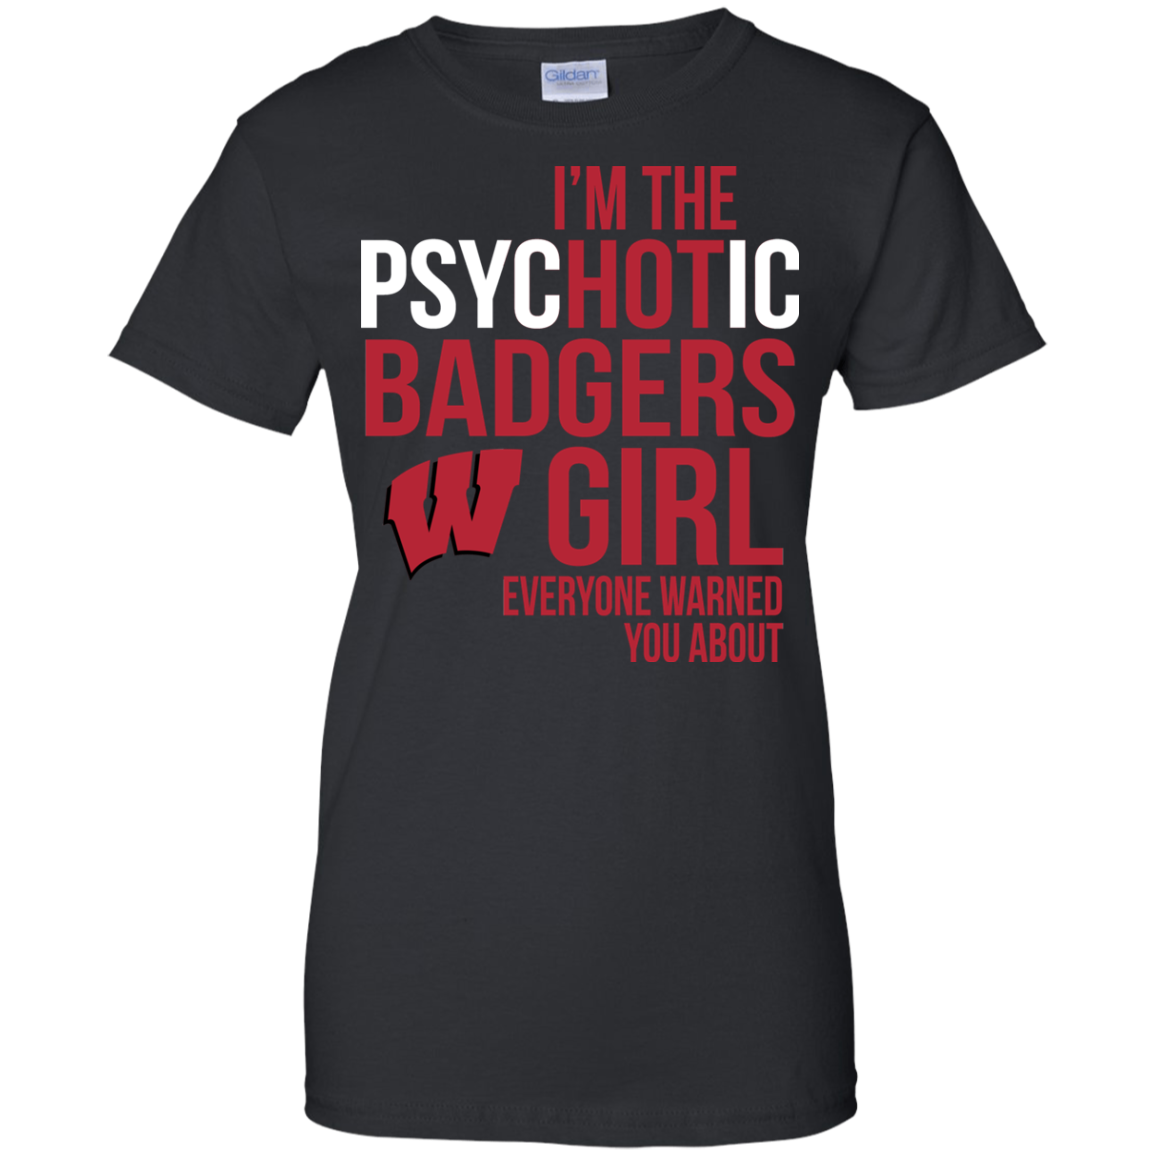 I Am The Psychotic Wisconsin Badgers Girl Everyone Warned You About T-shirt 